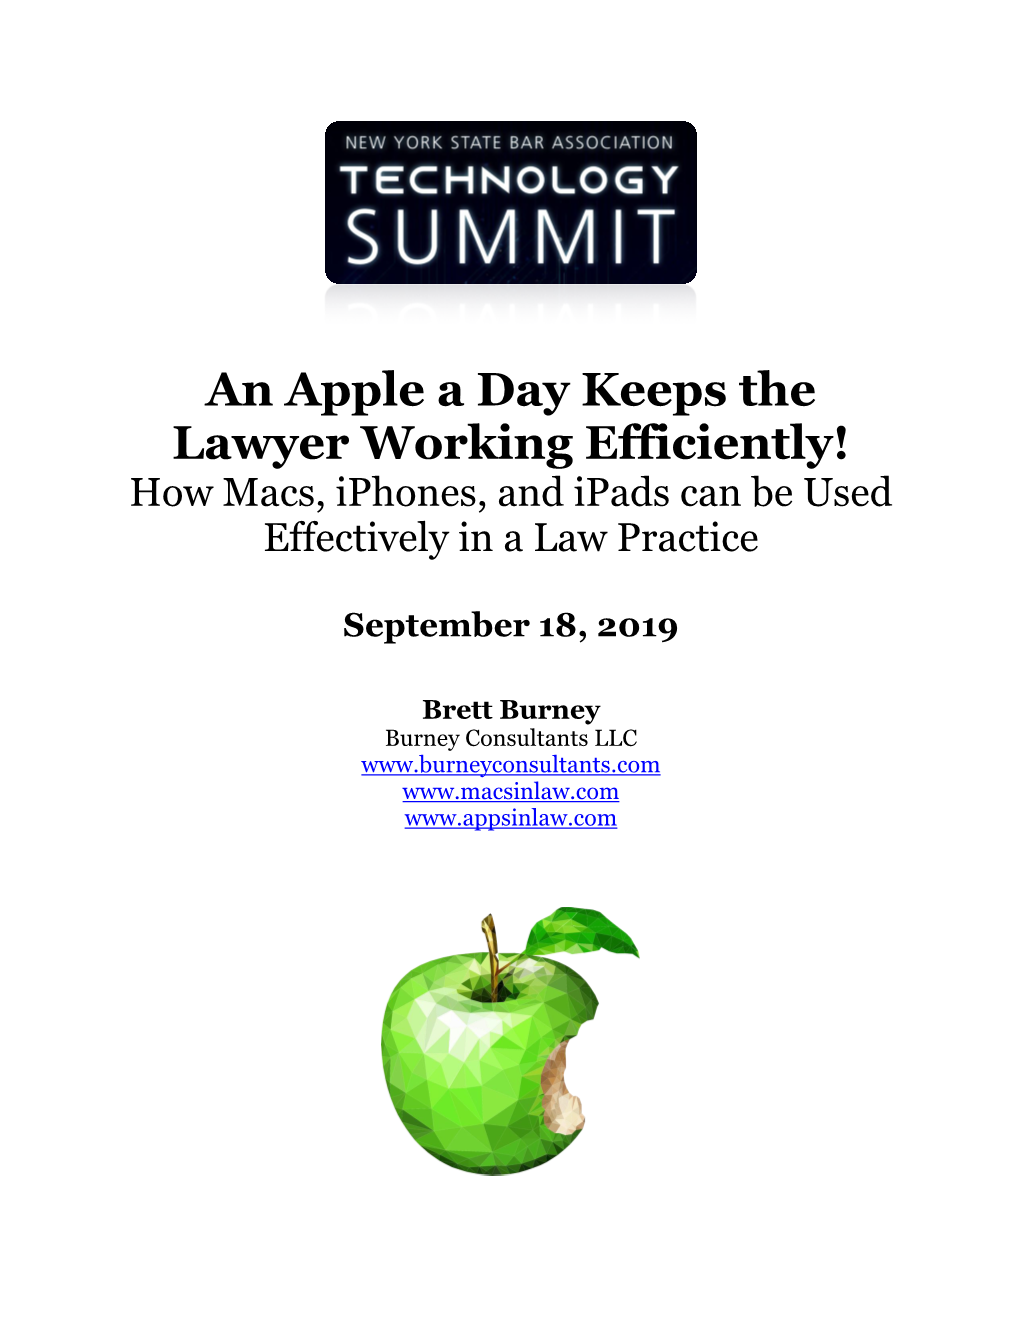 BURNEY-An Apple a Day Keeps the Lawyer Working Efficiently